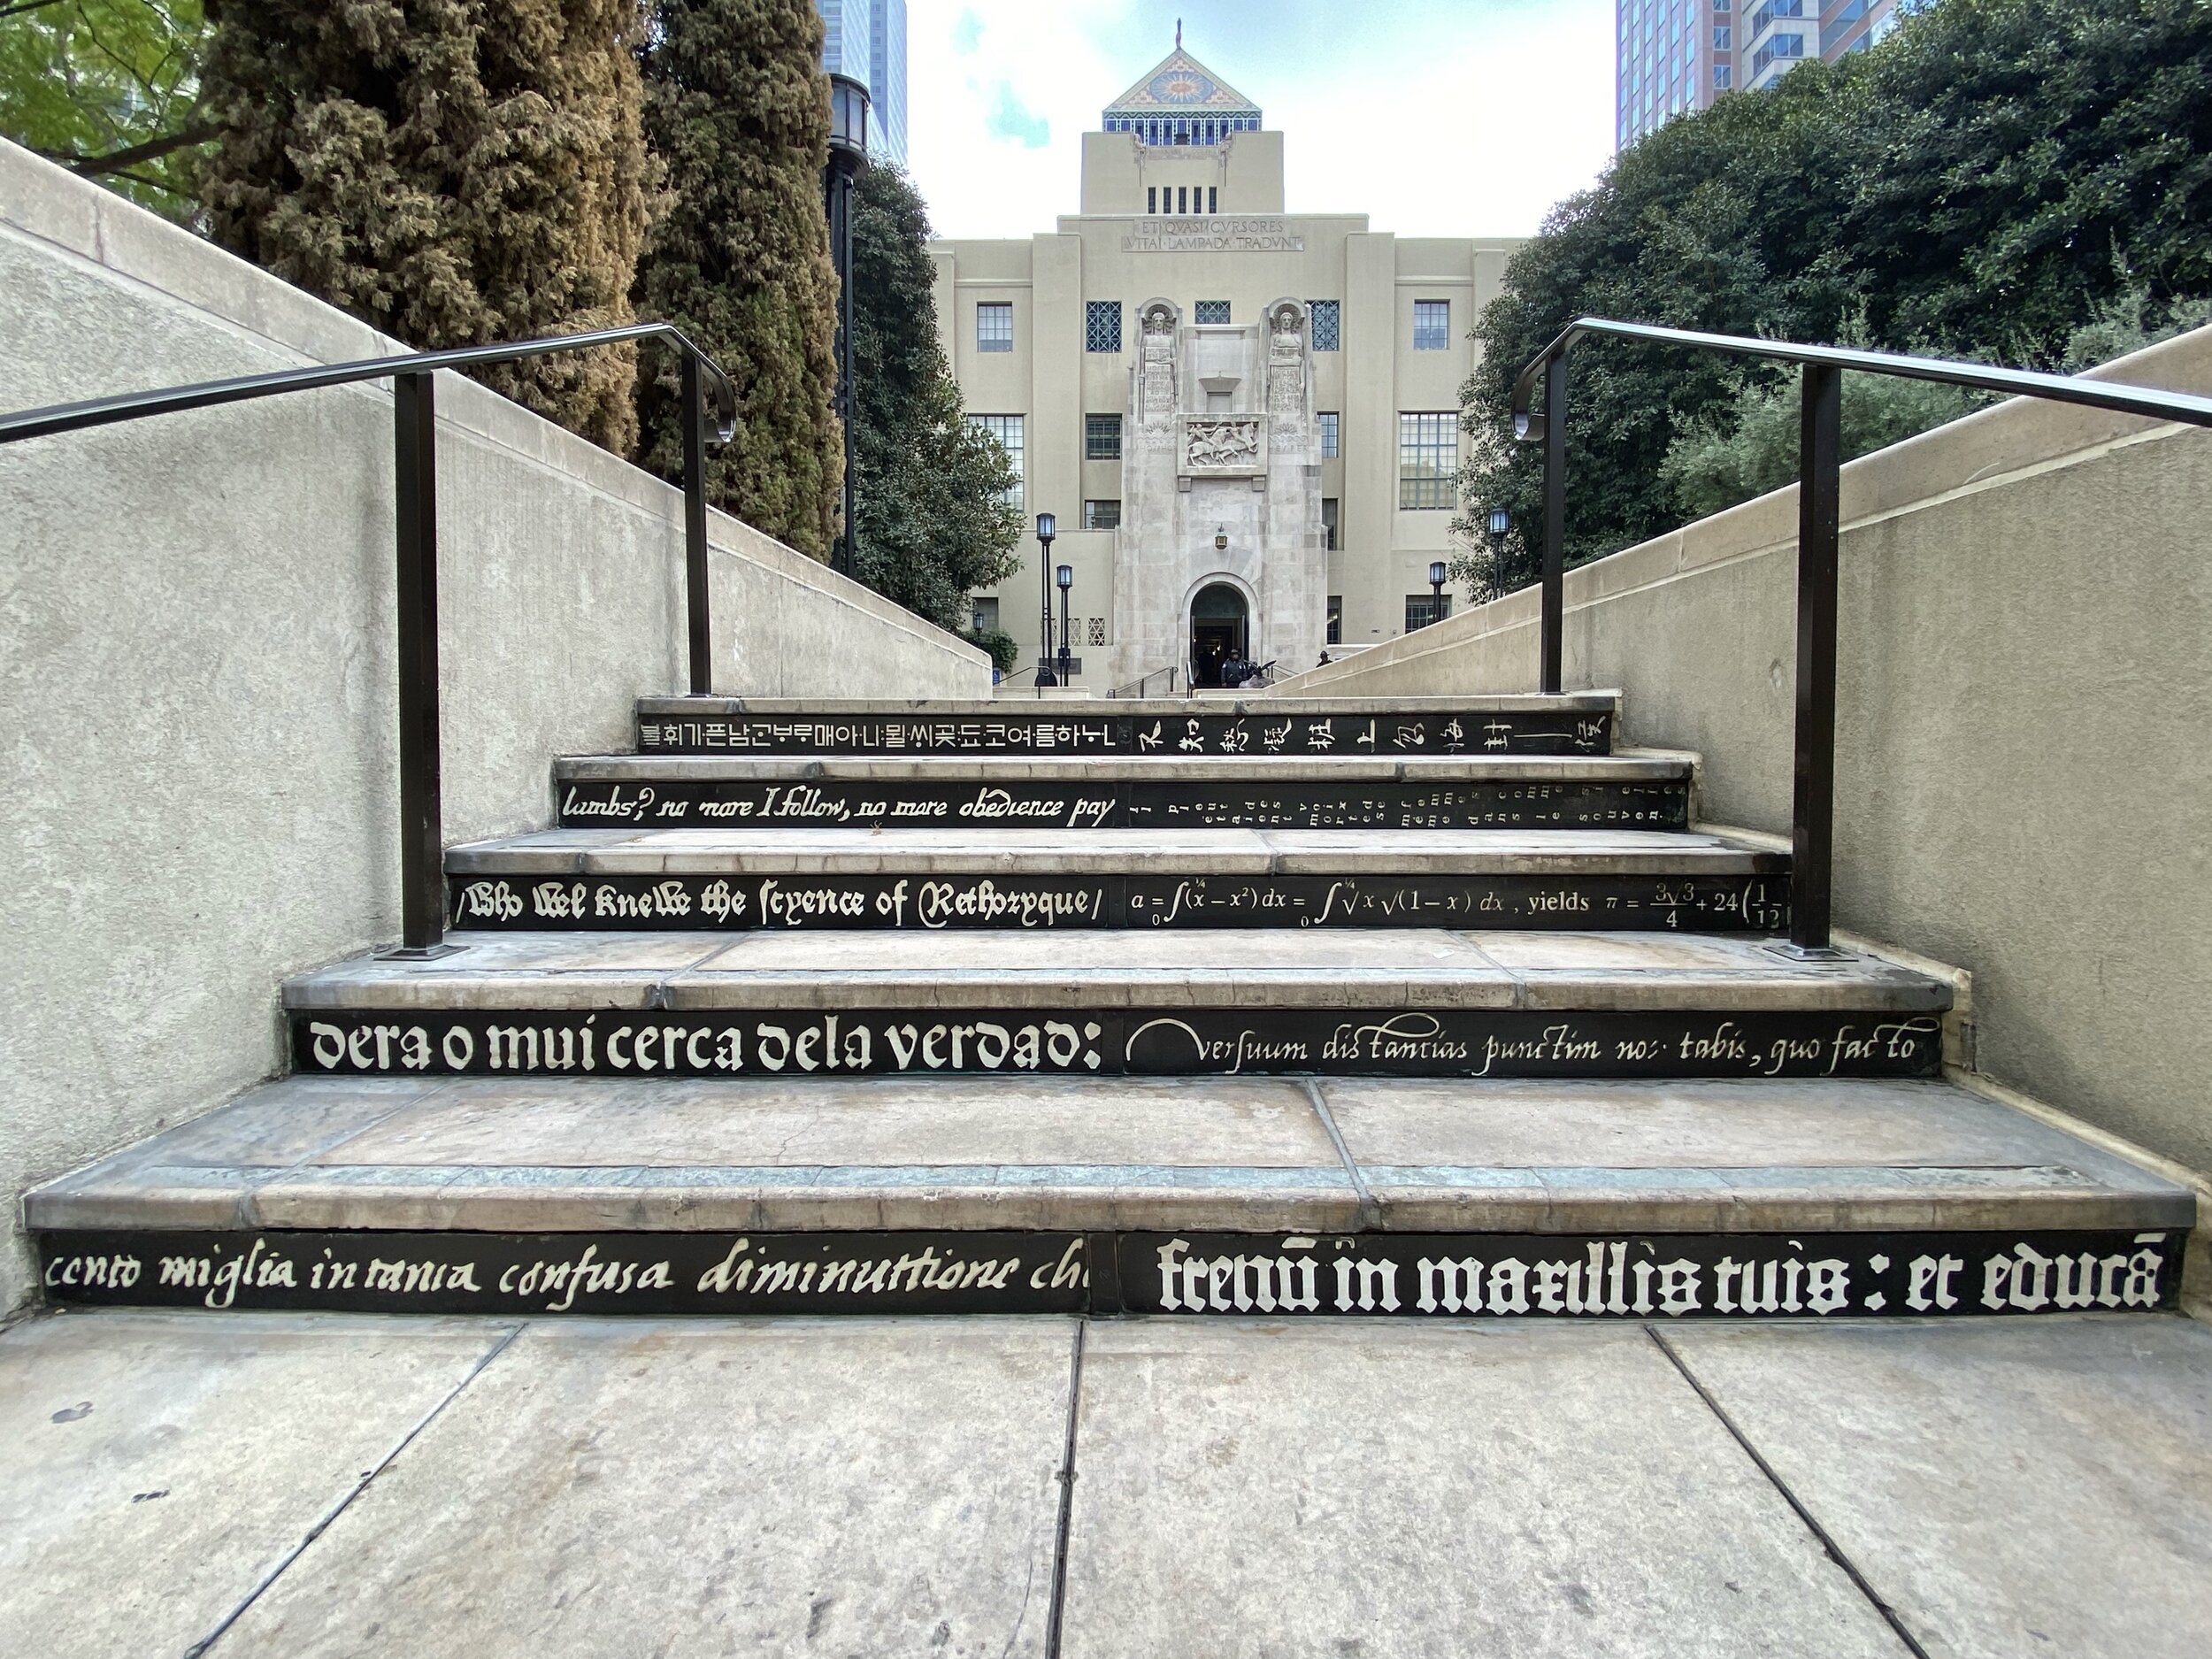 The Inscriptions on the Stairs symbolize the Evolution of Language. 